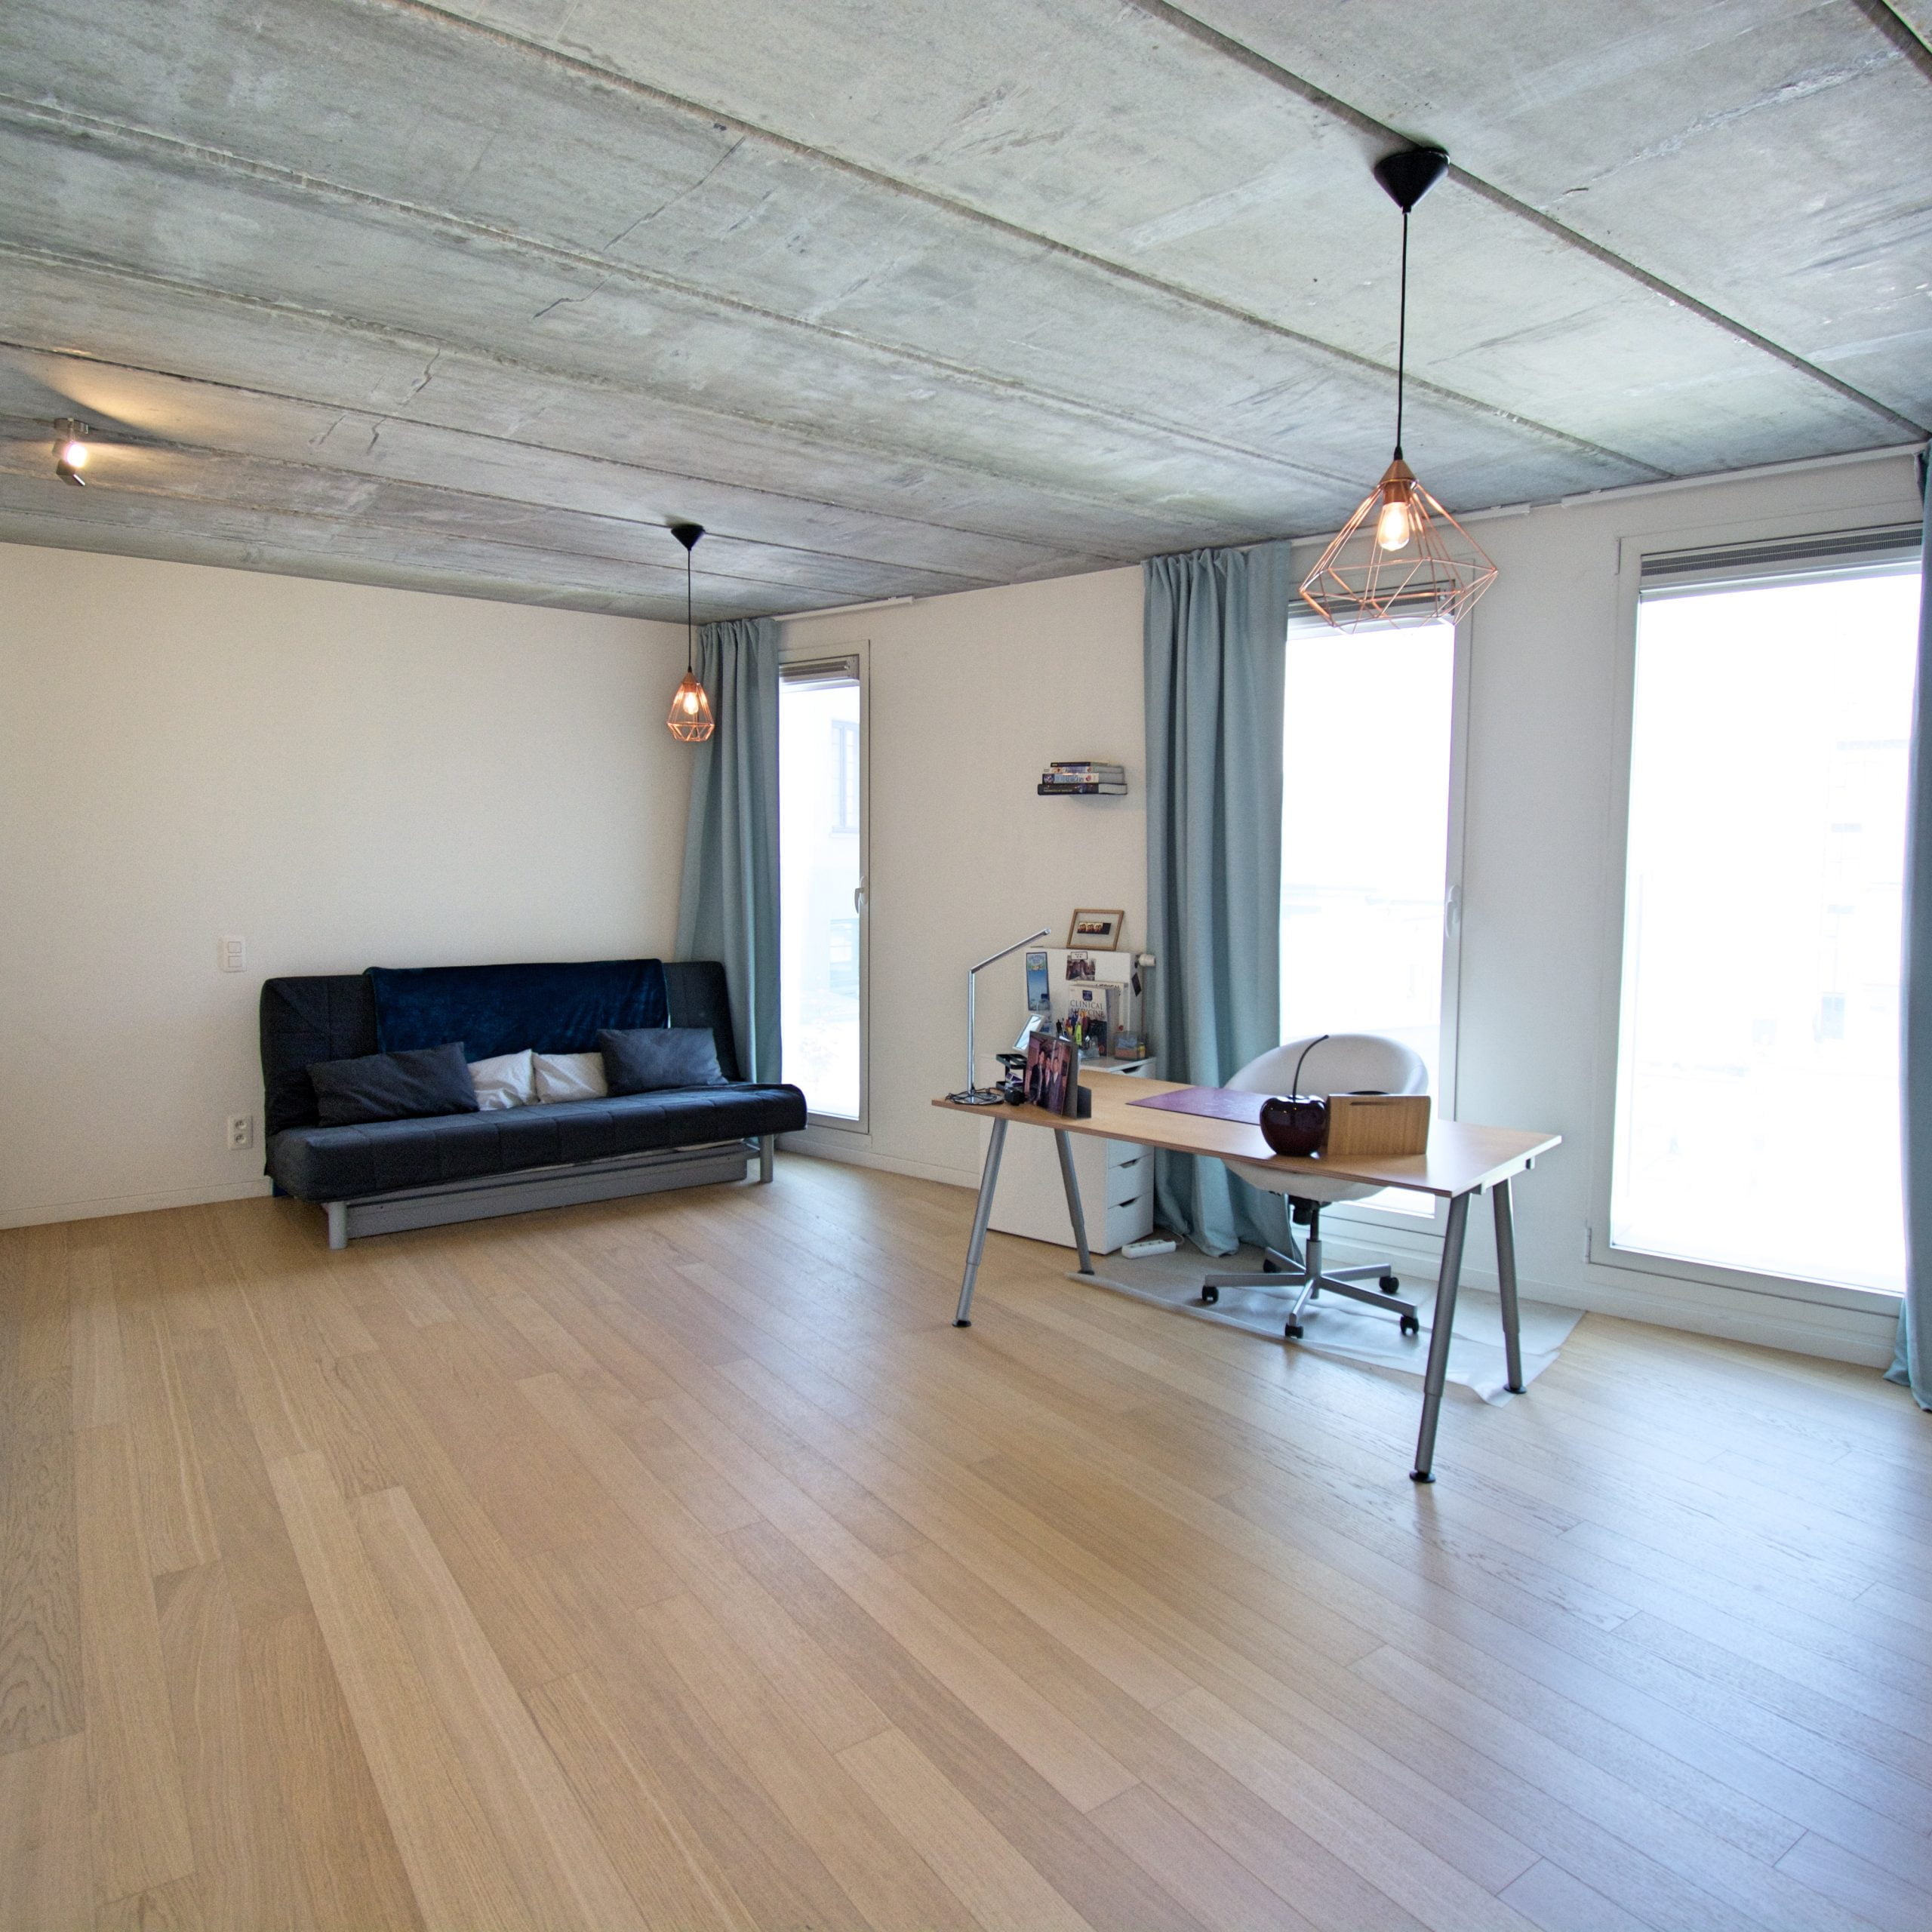 Rental apartment for expats in Antwerp